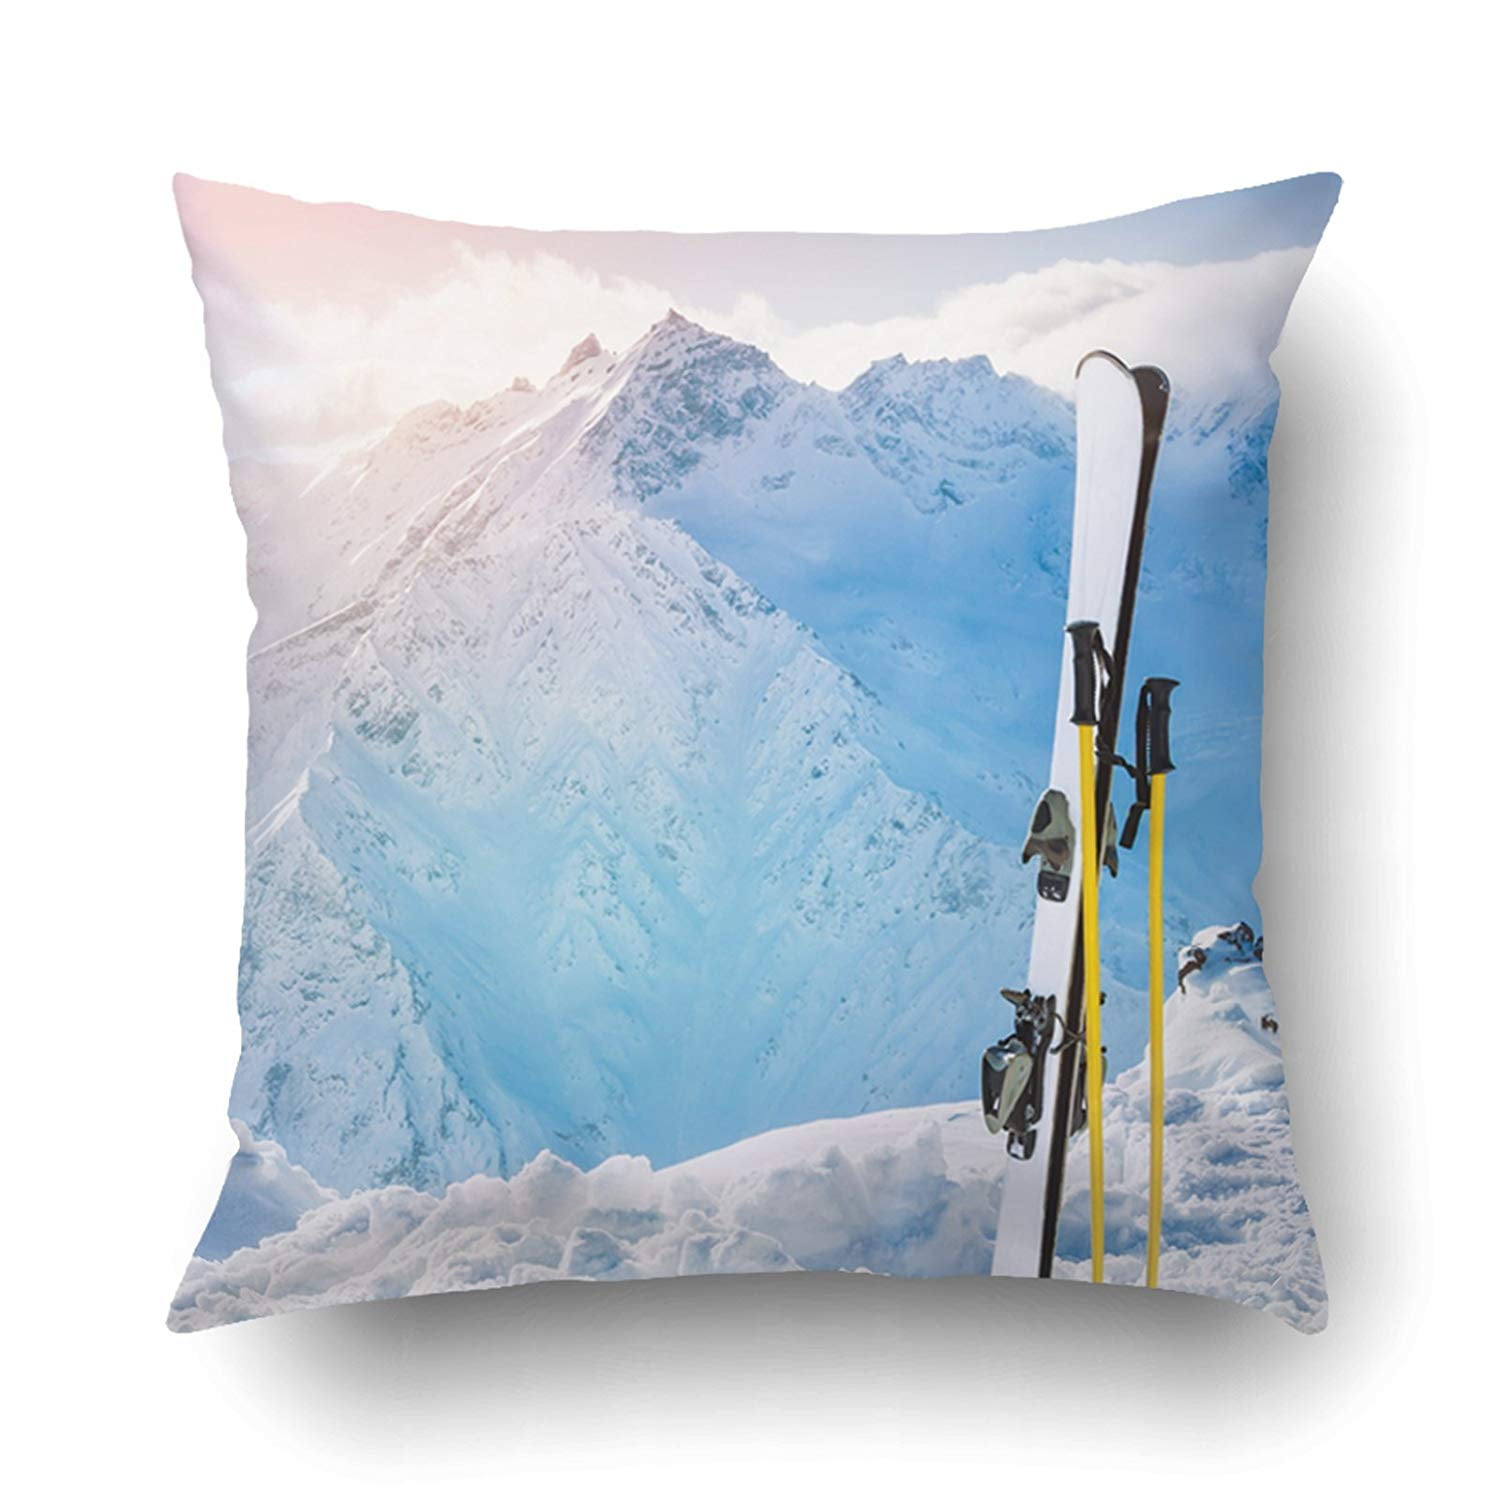 Snowboarder Ski Winter Sports Snowboarding Gift American Flag Snowboard Mountains Nature Athlete Sporty Throw Pillow Multicolor 18x18